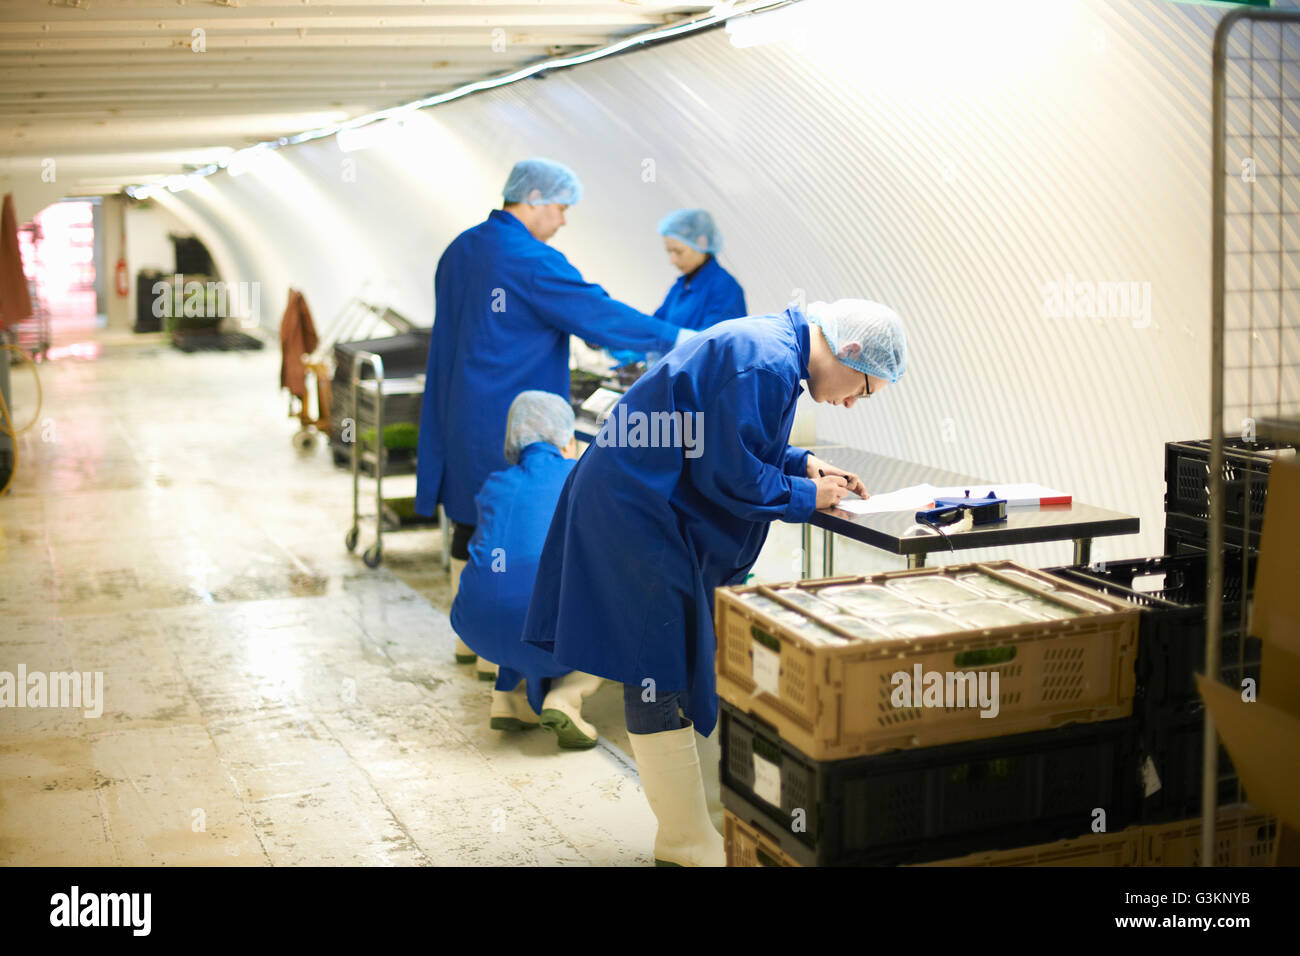 Workers wearing overalls and hair nets working on production line Stock Photo